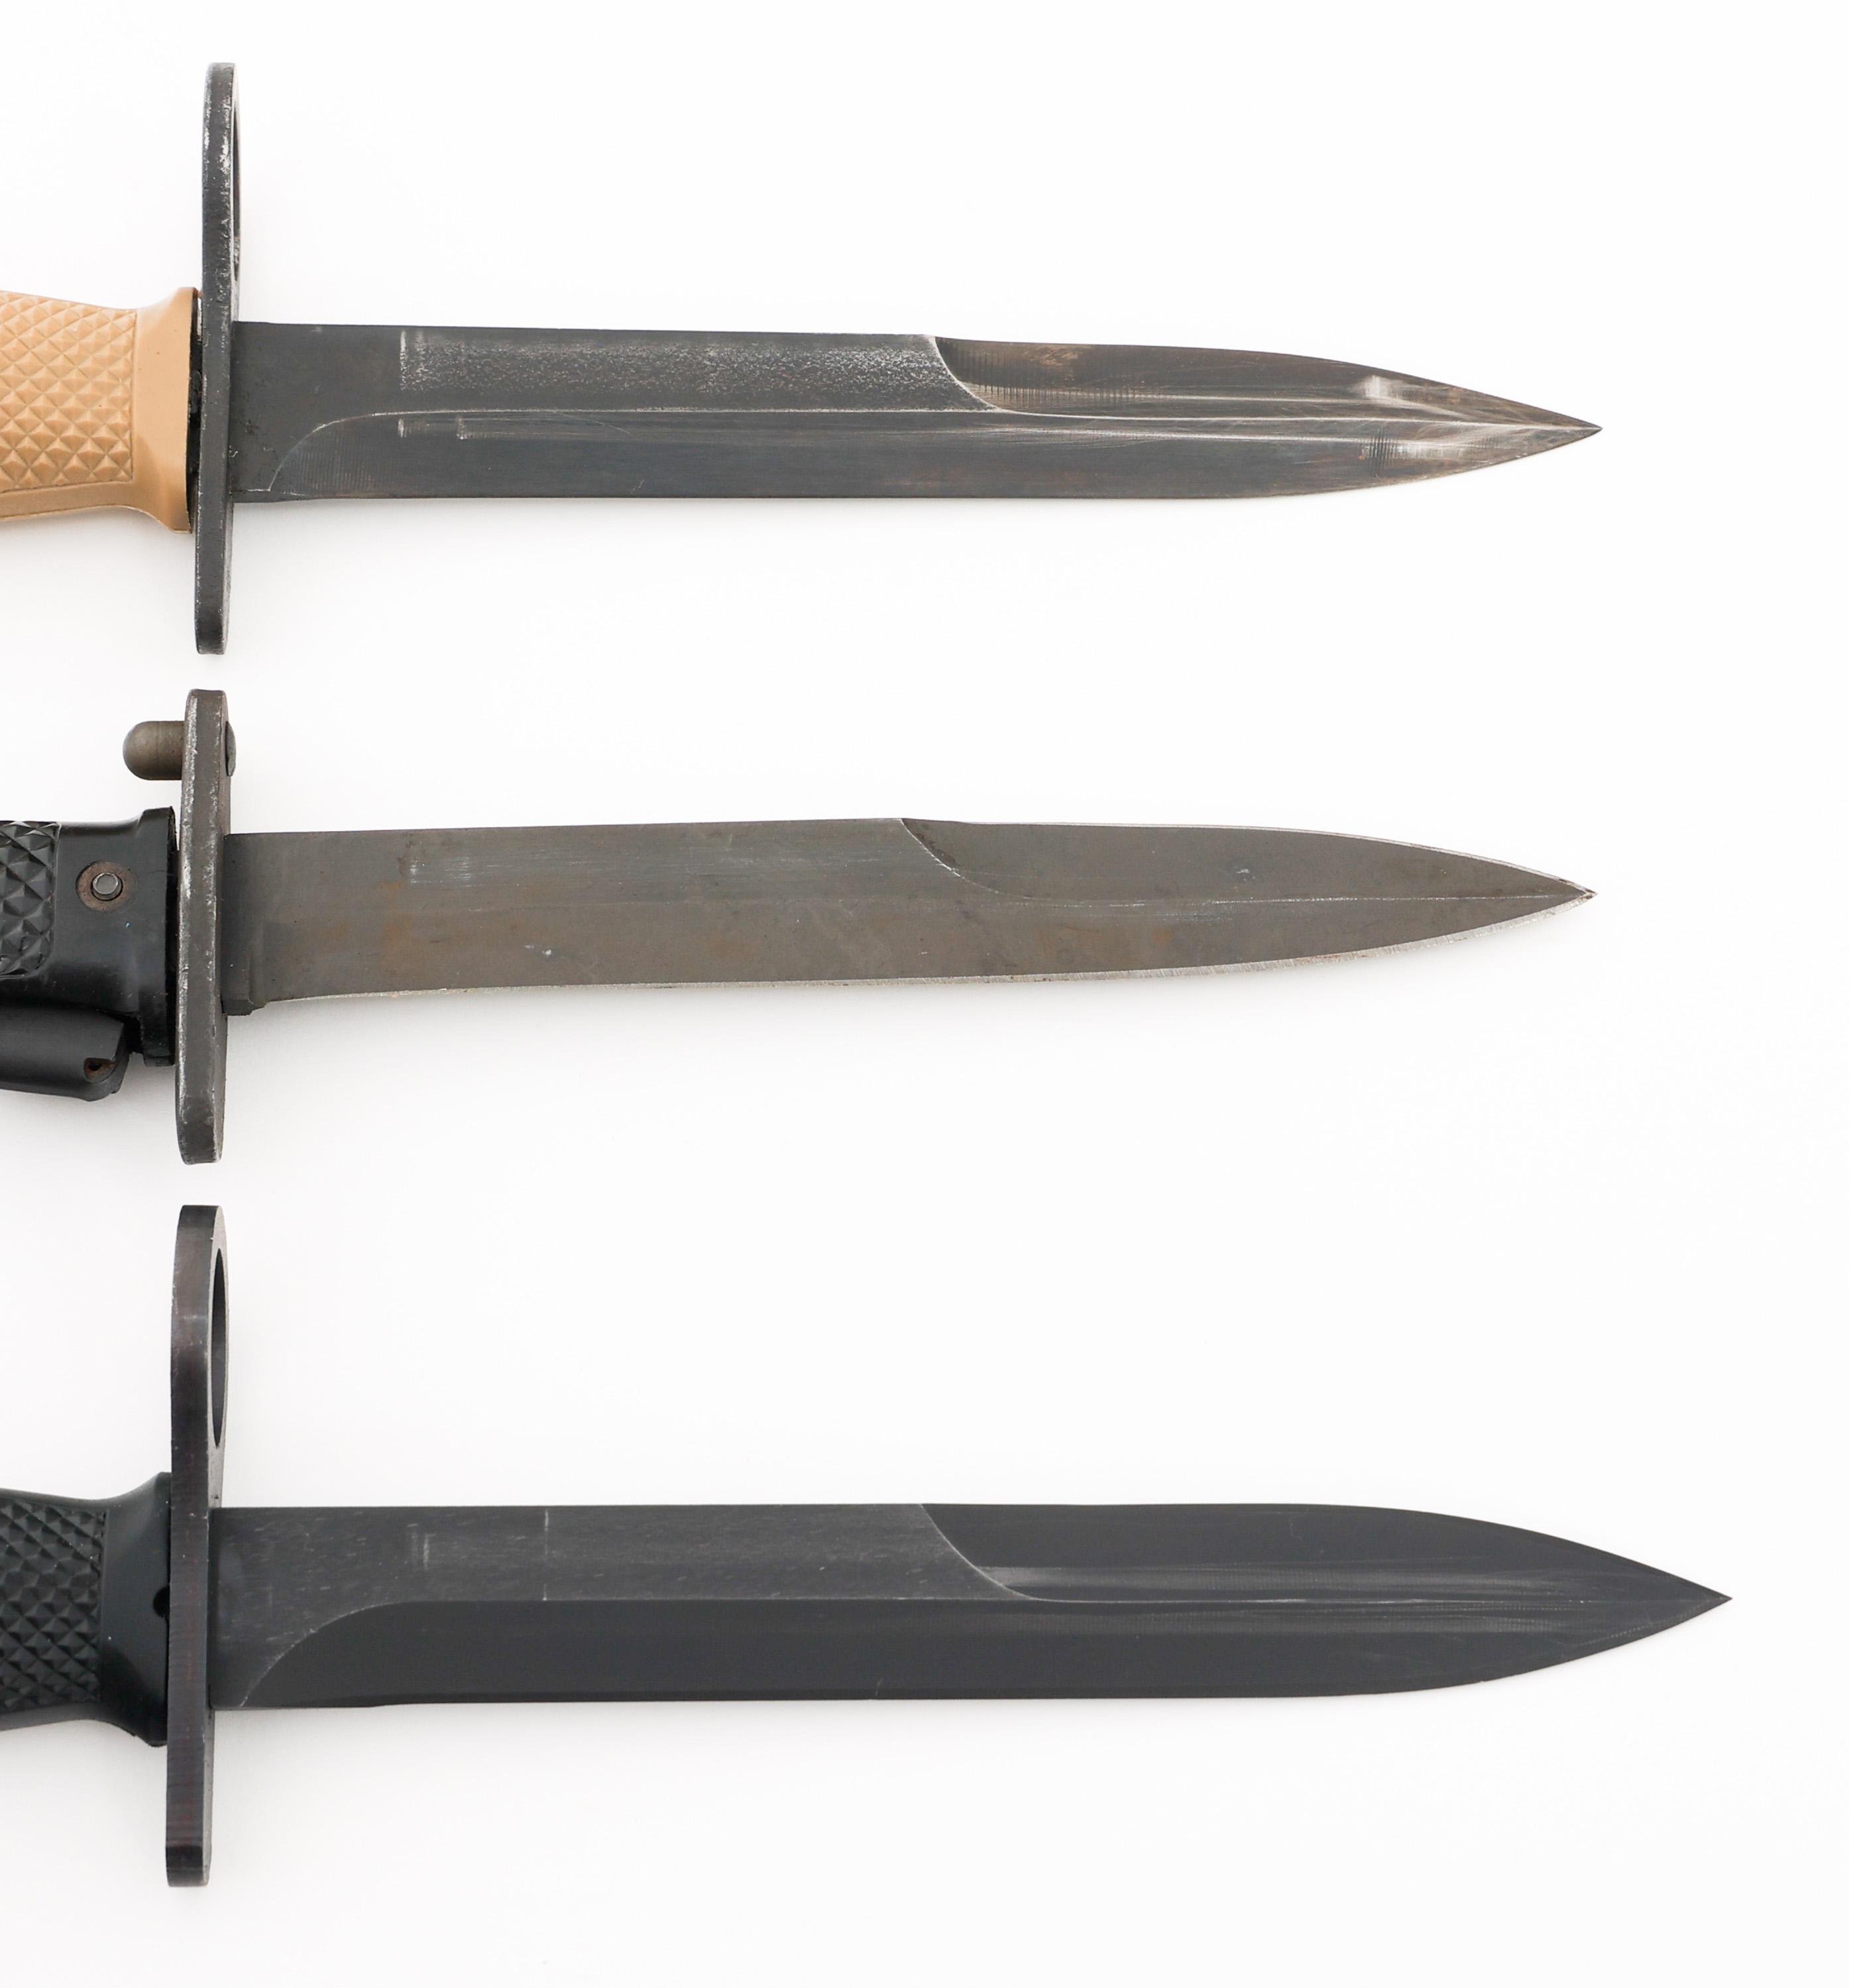 COLD WAR US M7 & M5A1 BAYONETS WITH SCABBARDS